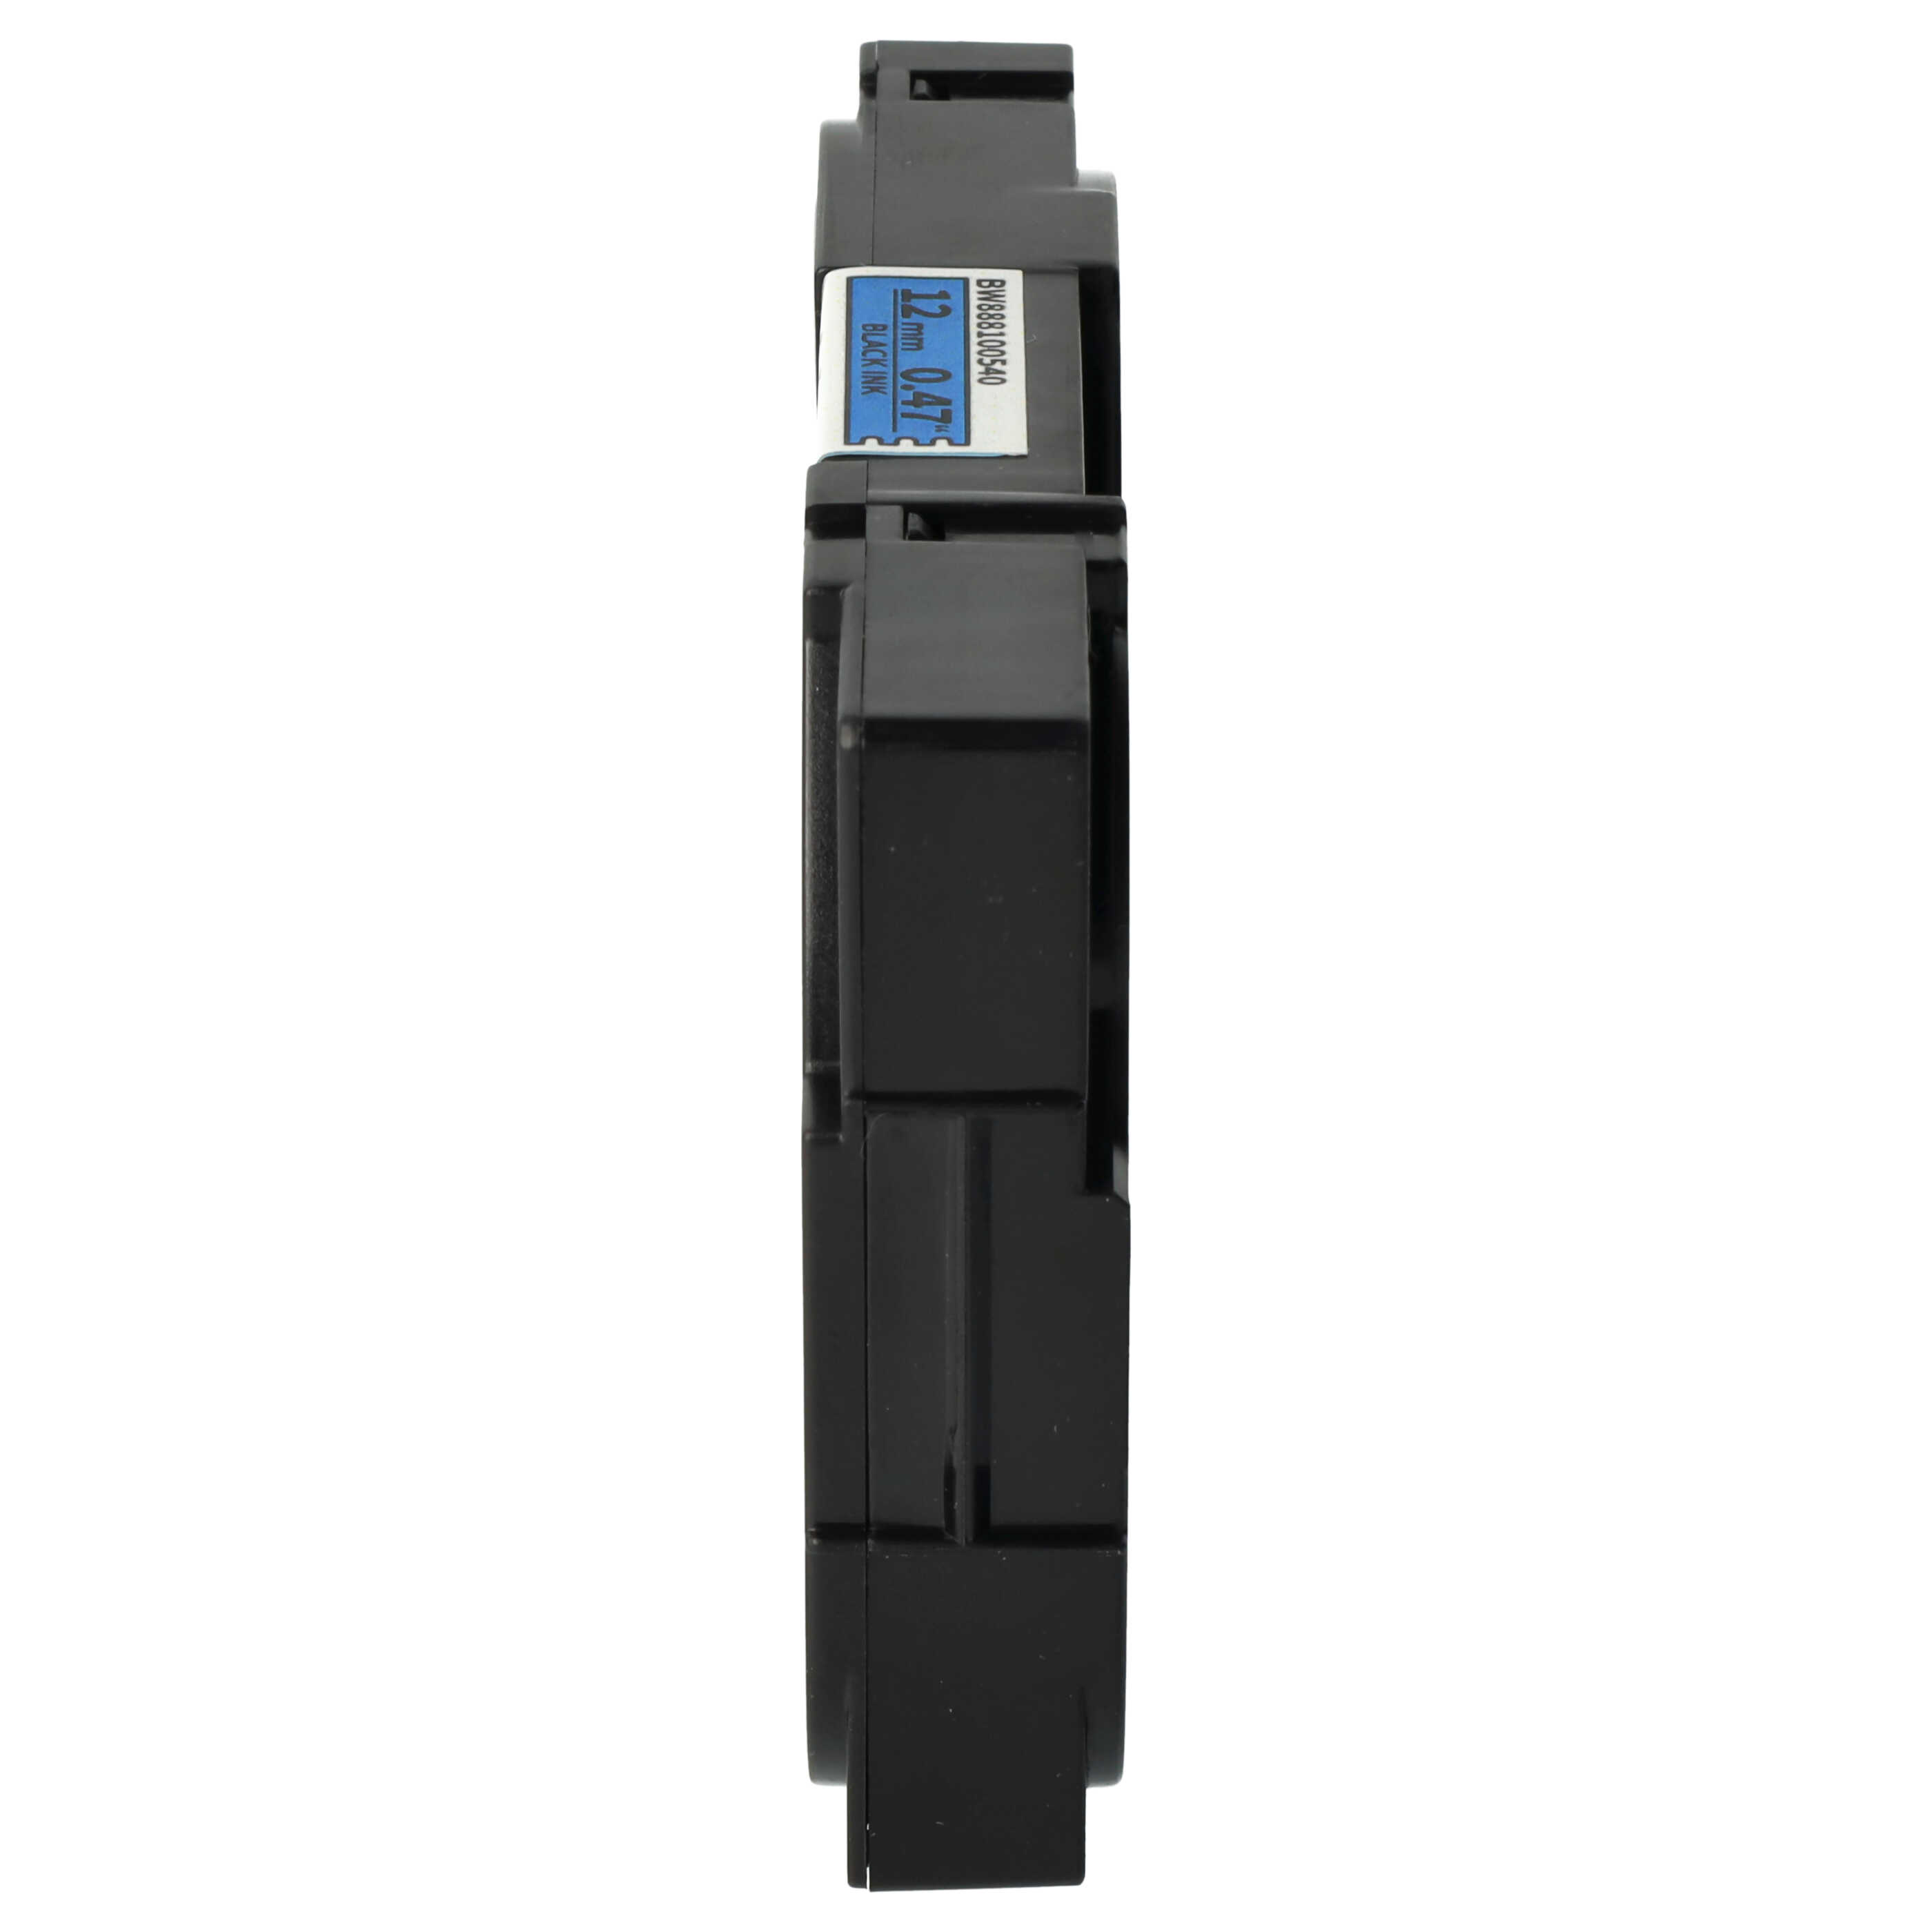 Label Tape as Replacement for Brother HGE-S531, HGES531, AHe-S531 - 12 mm Black to Blue